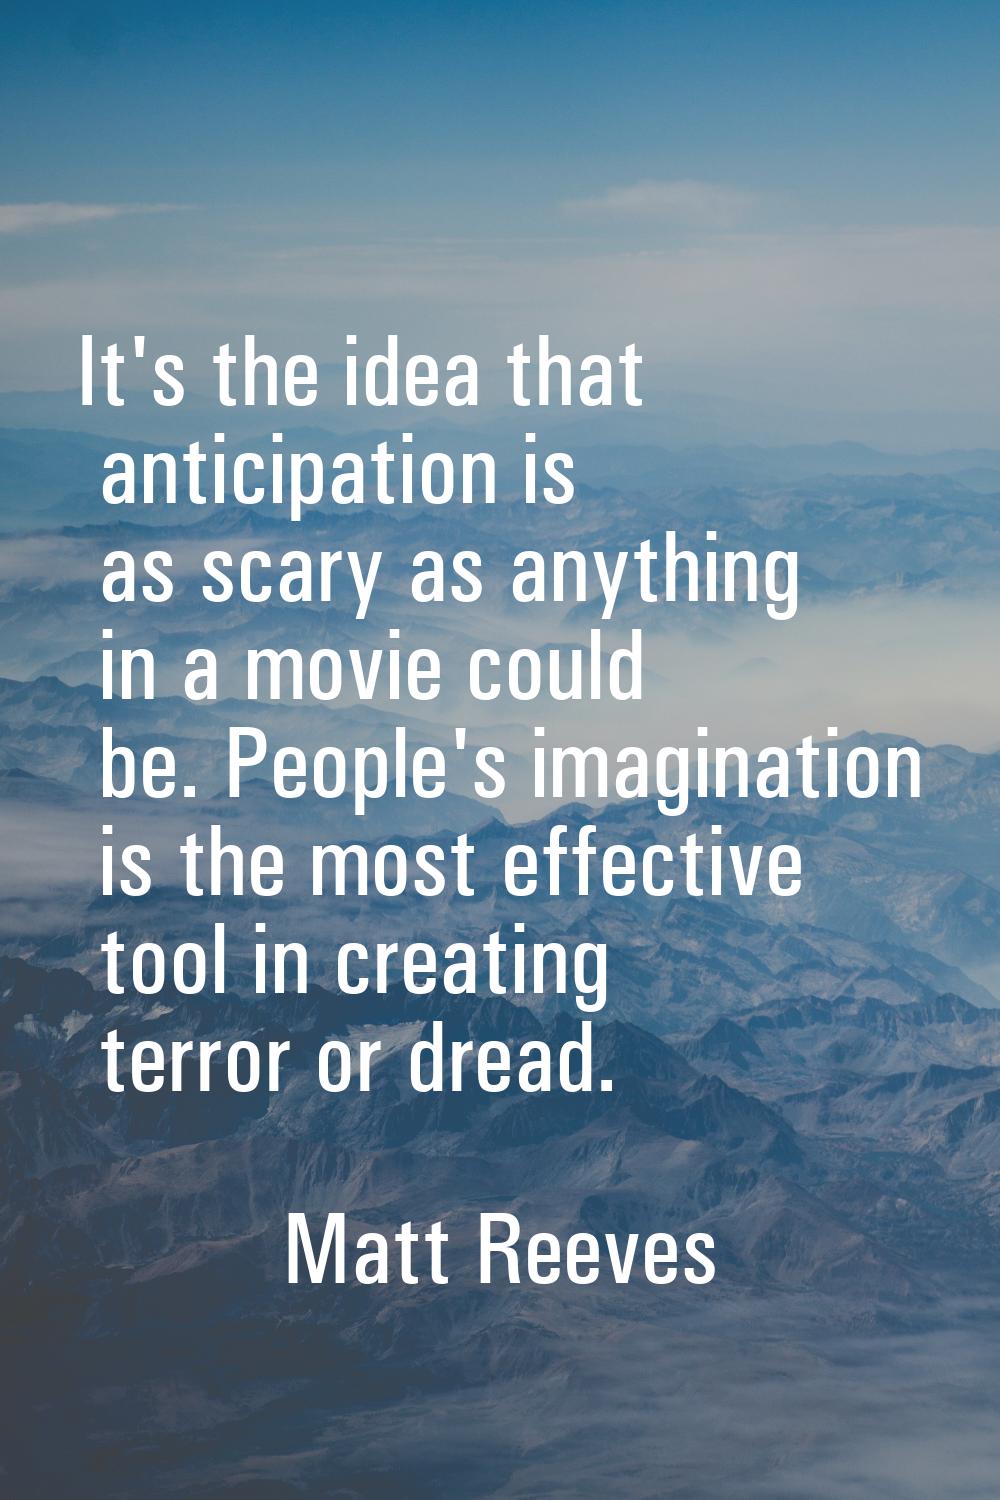 It's the idea that anticipation is as scary as anything in a movie could be. People's imagination i